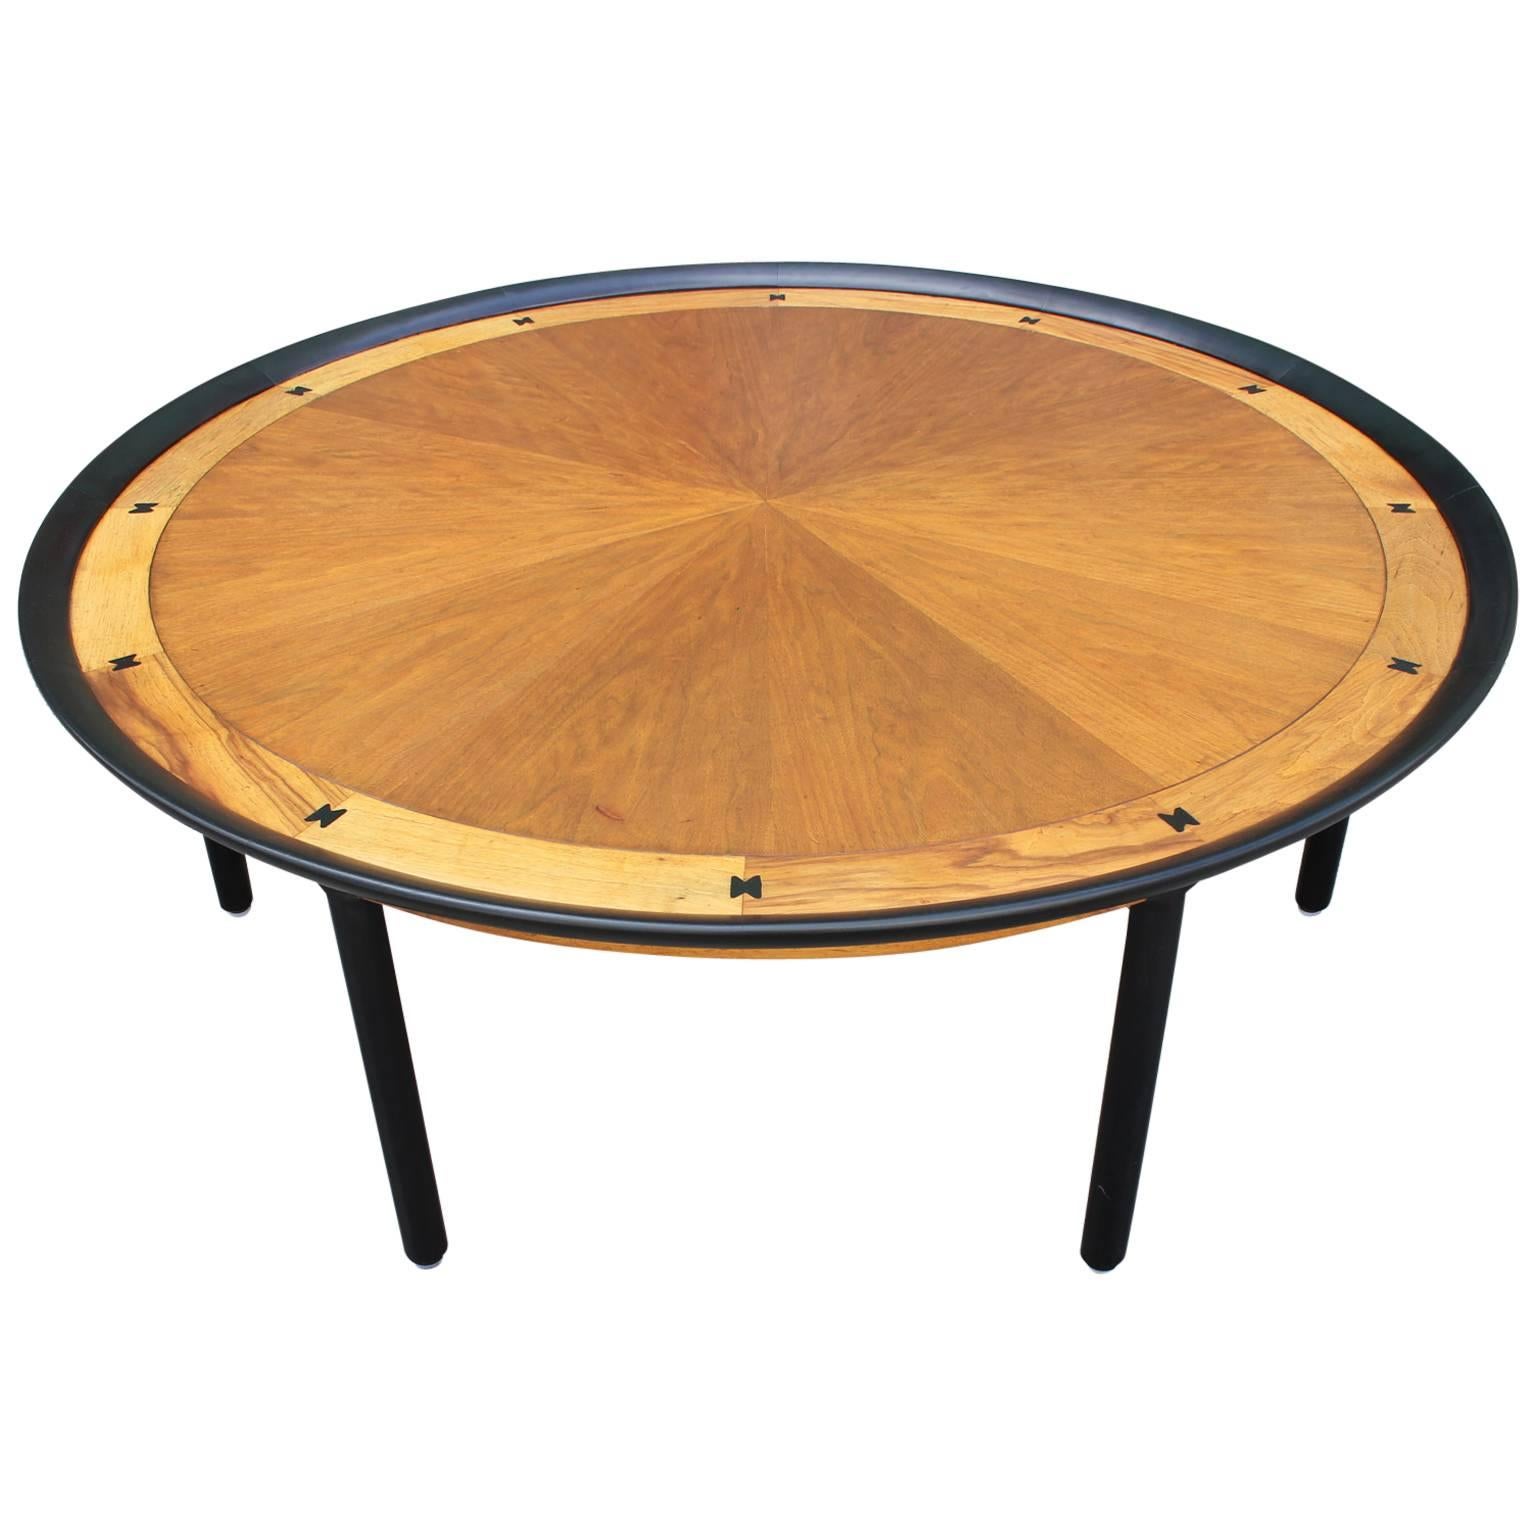 Striking Large Inlaid Round Modern Coffee Center Table Two Tone